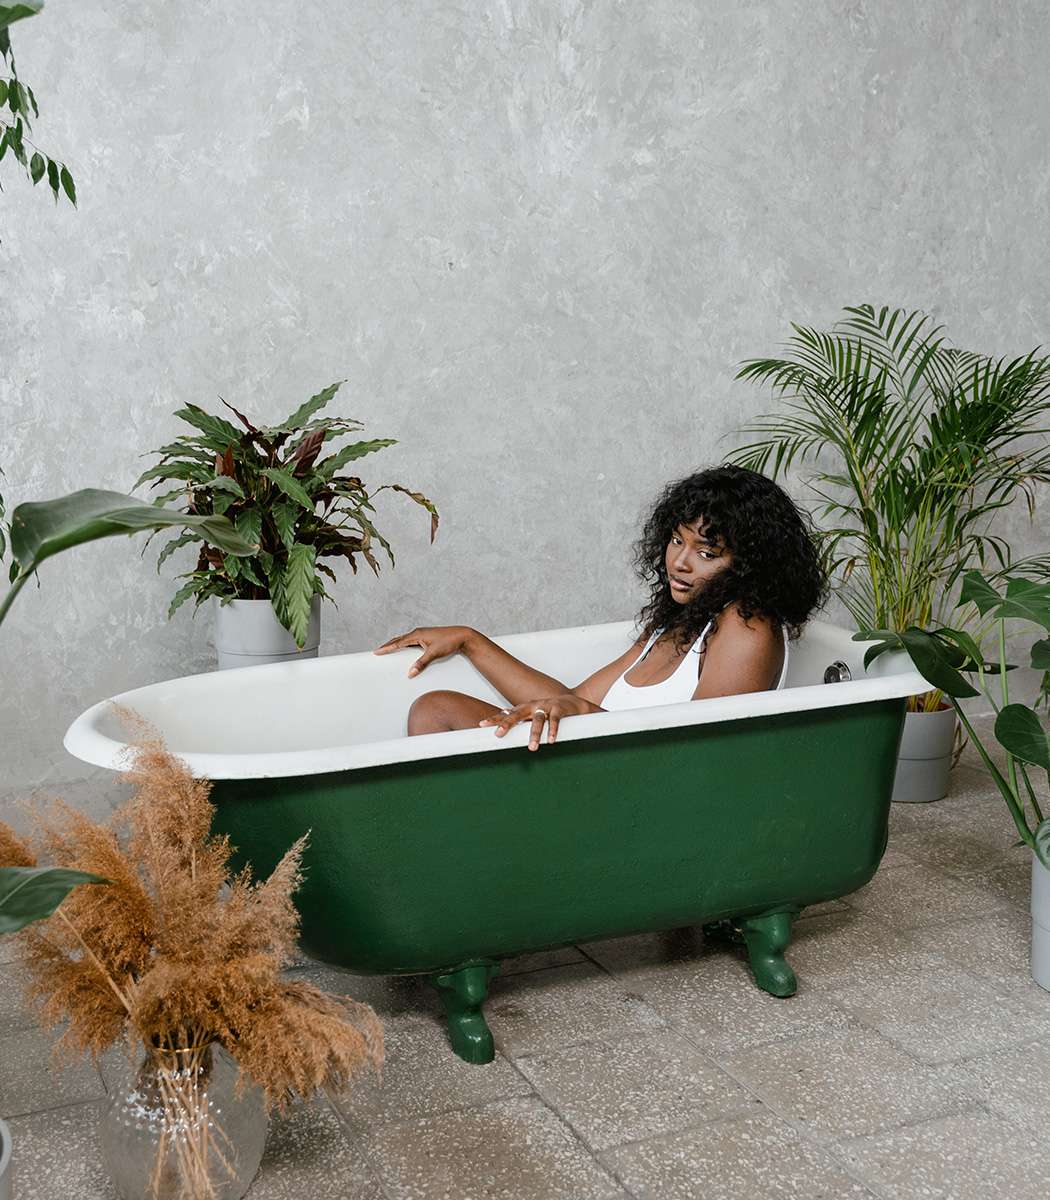 Home plants for all types of bathrooms | farra.com